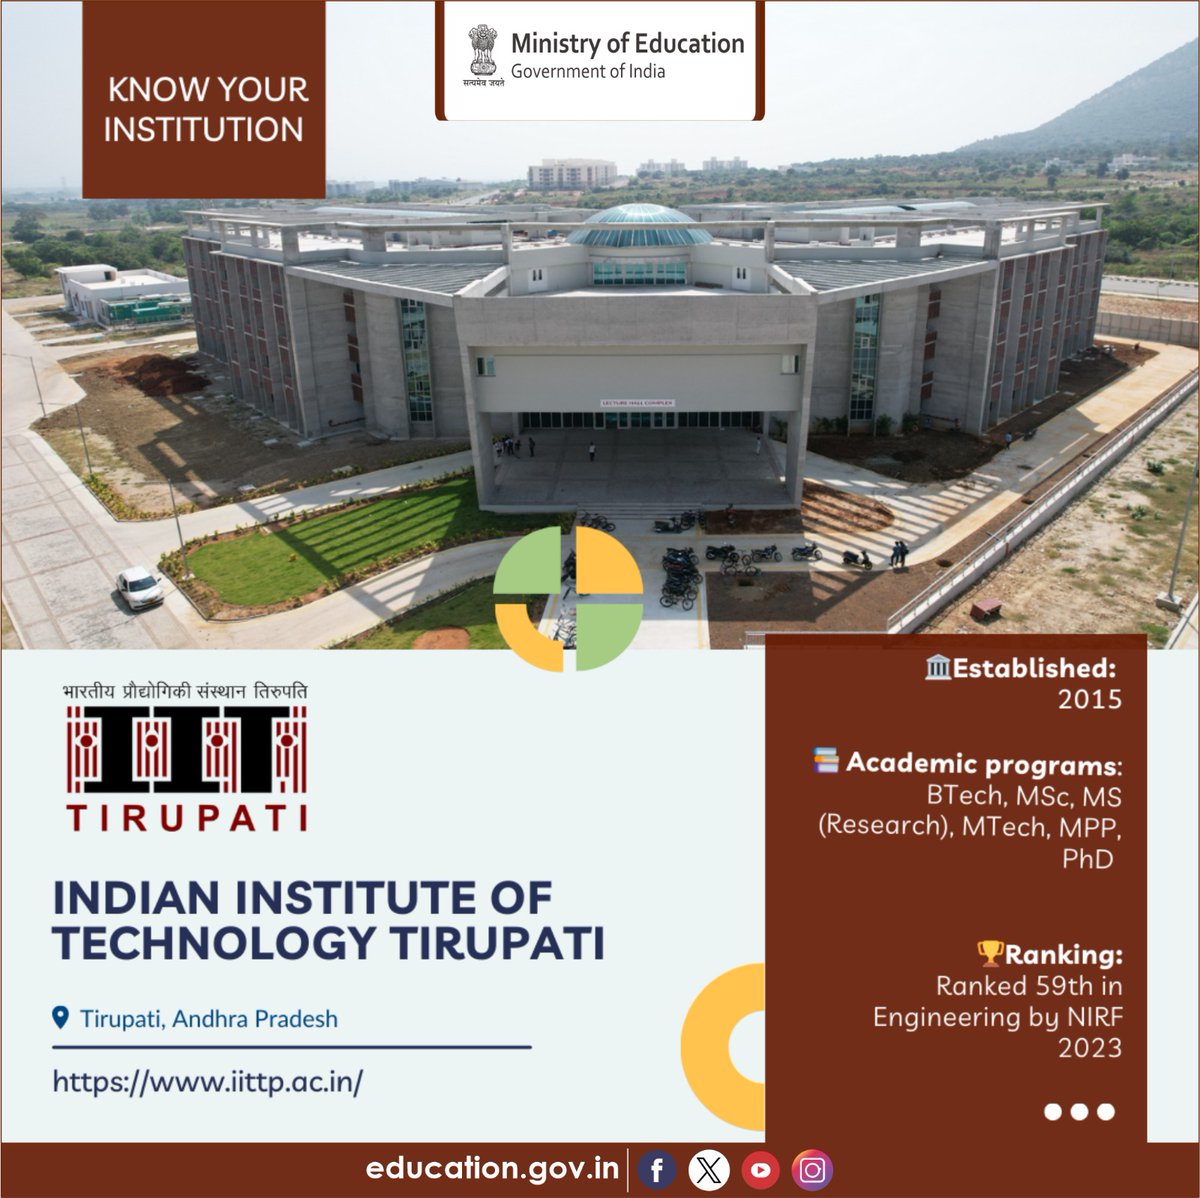 Know about the HEIs of India! Established in 2015, Indian Institute of Technology Tirupati (IIT Tirupati) has carved a niche for itself in the realm of technical education and research in India. Offering a diverse array of academic programs including BTech, MSc, MS (Research),